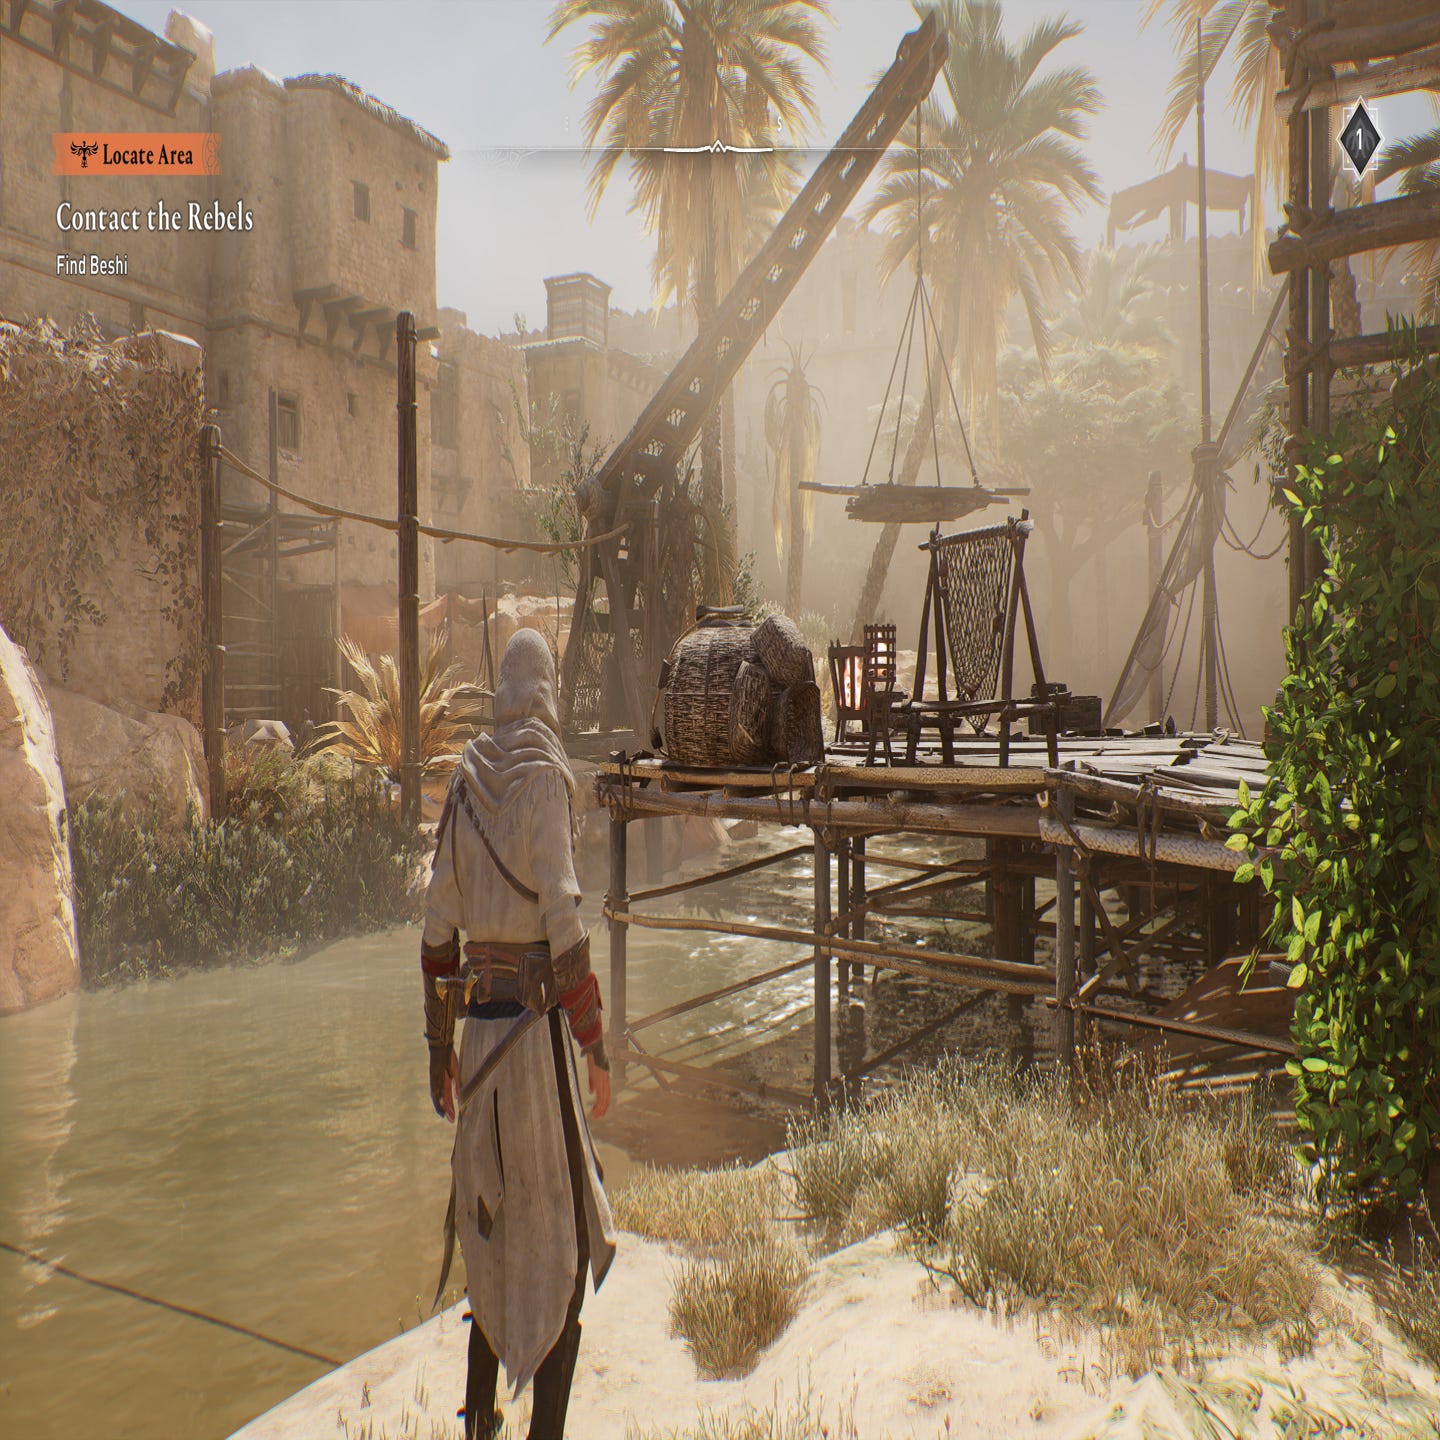 Assassins Creed Mirage PC Specs & Requirements